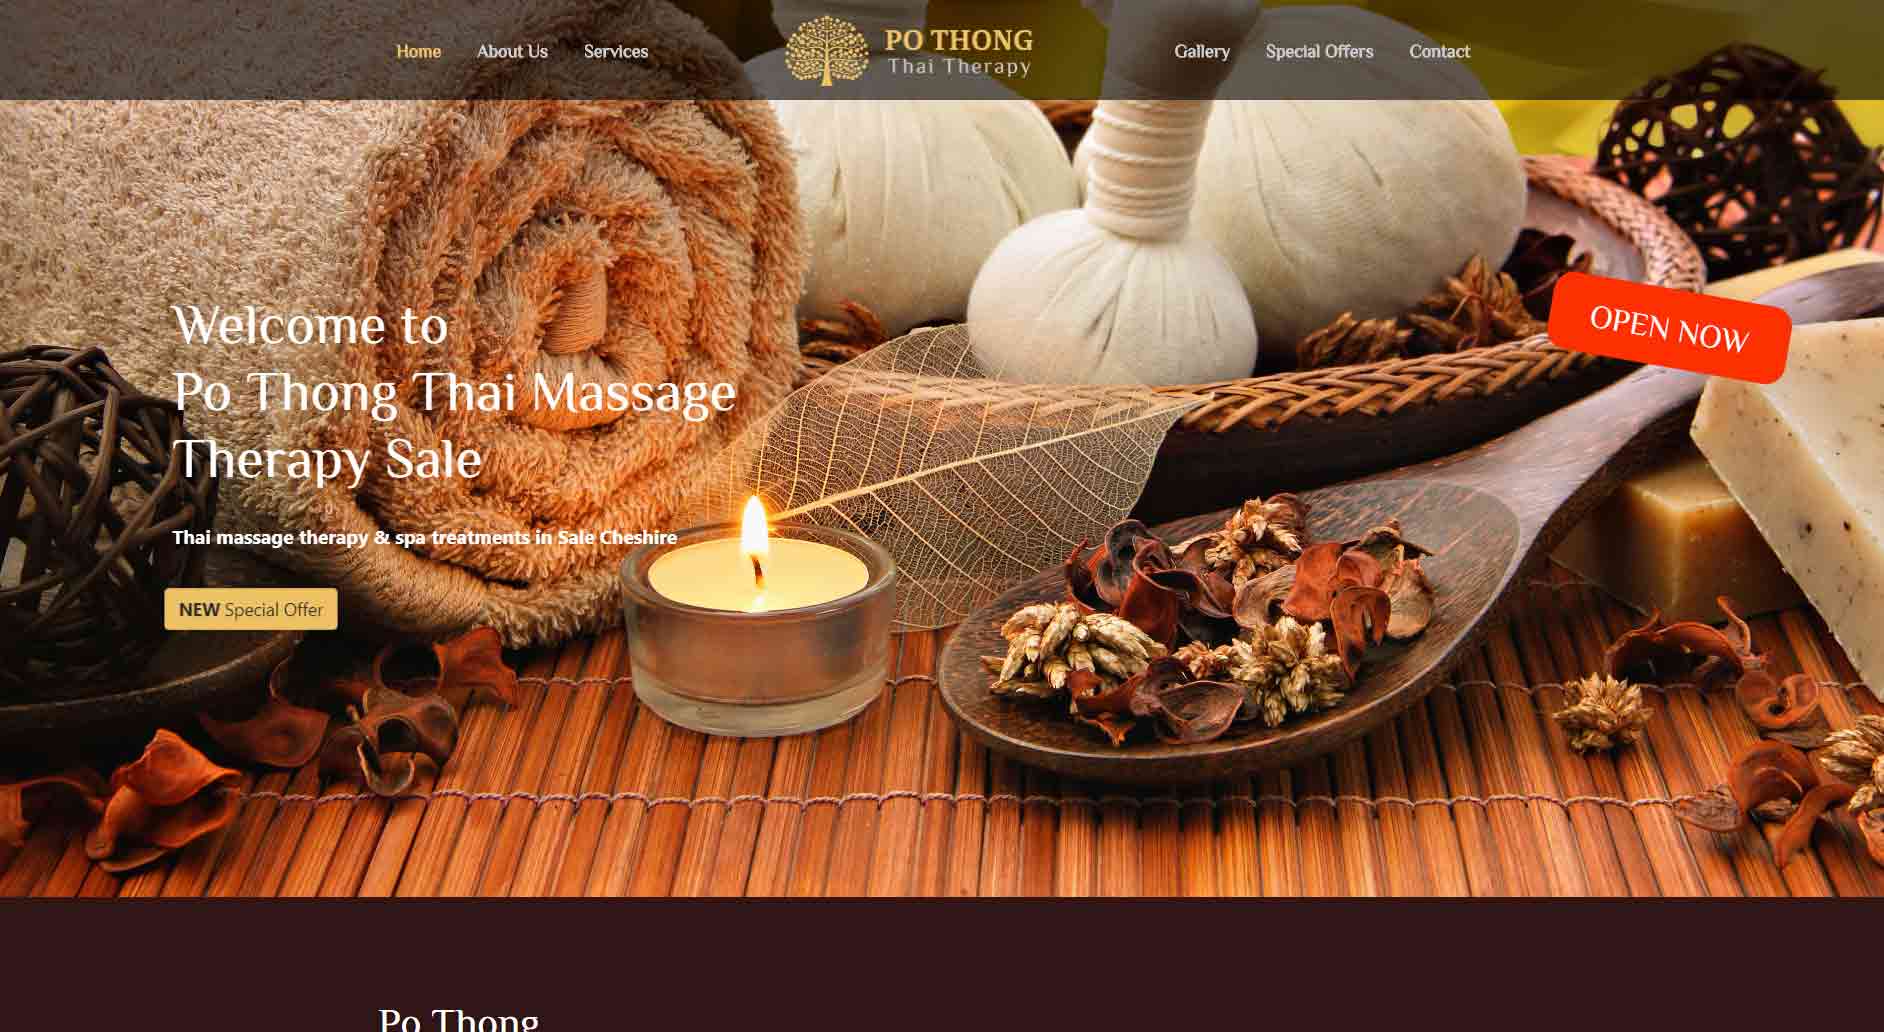 Po Thong Thai Therapy - by Cecil Web Designs